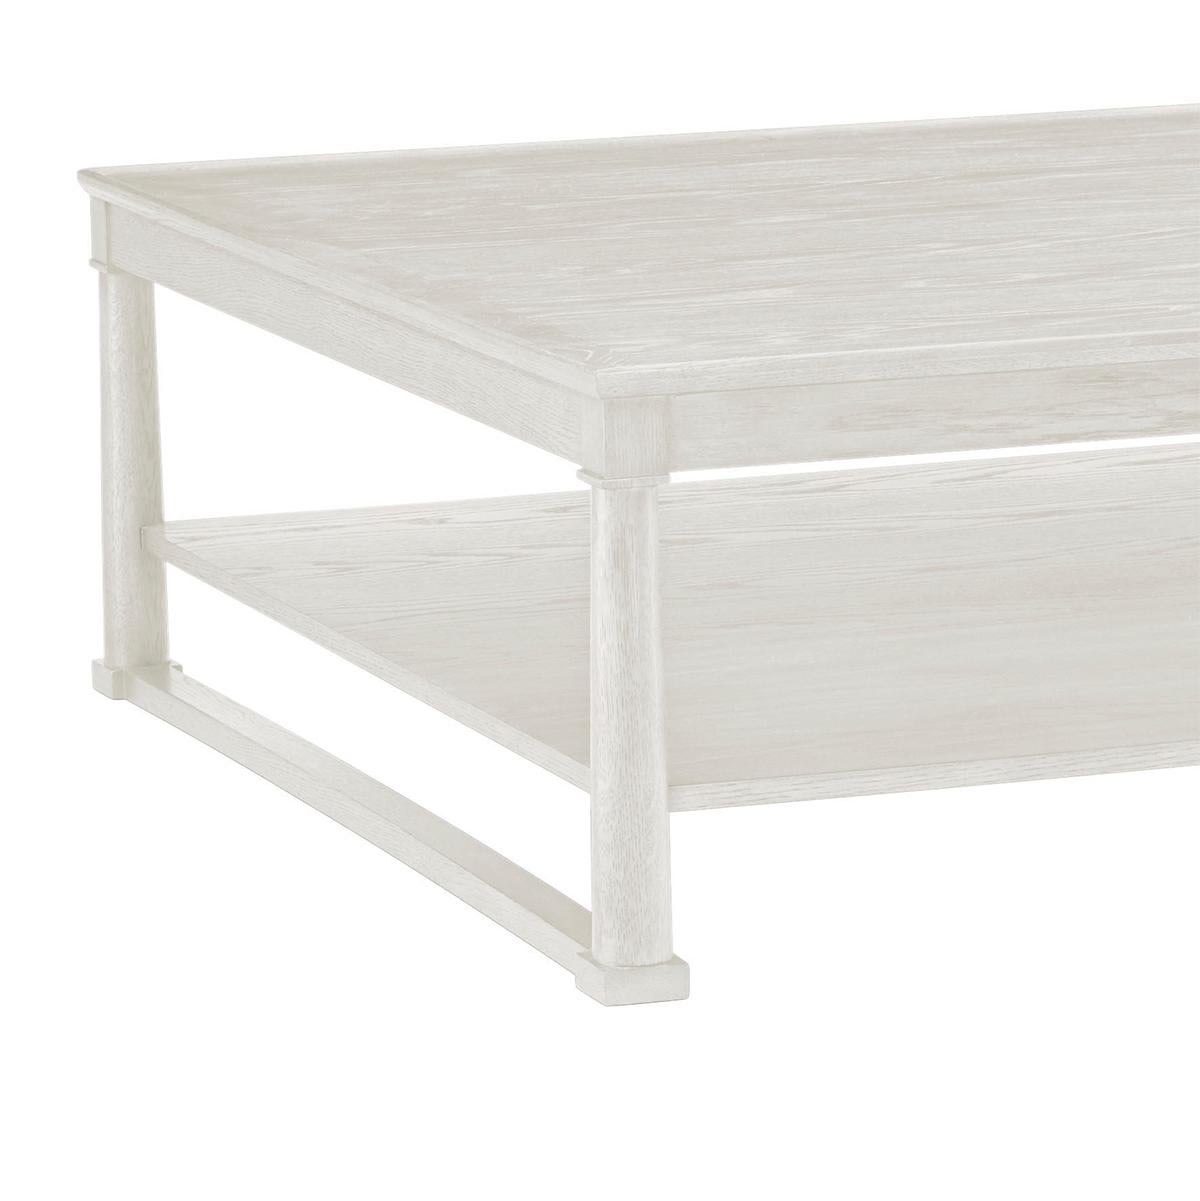 This elegantly designed piece combines functionality with style, making it the perfect centerpiece for any living room. Crafted from high-quality oak, the table white washed finish that highlights the natural grain and texture of the wood, adding